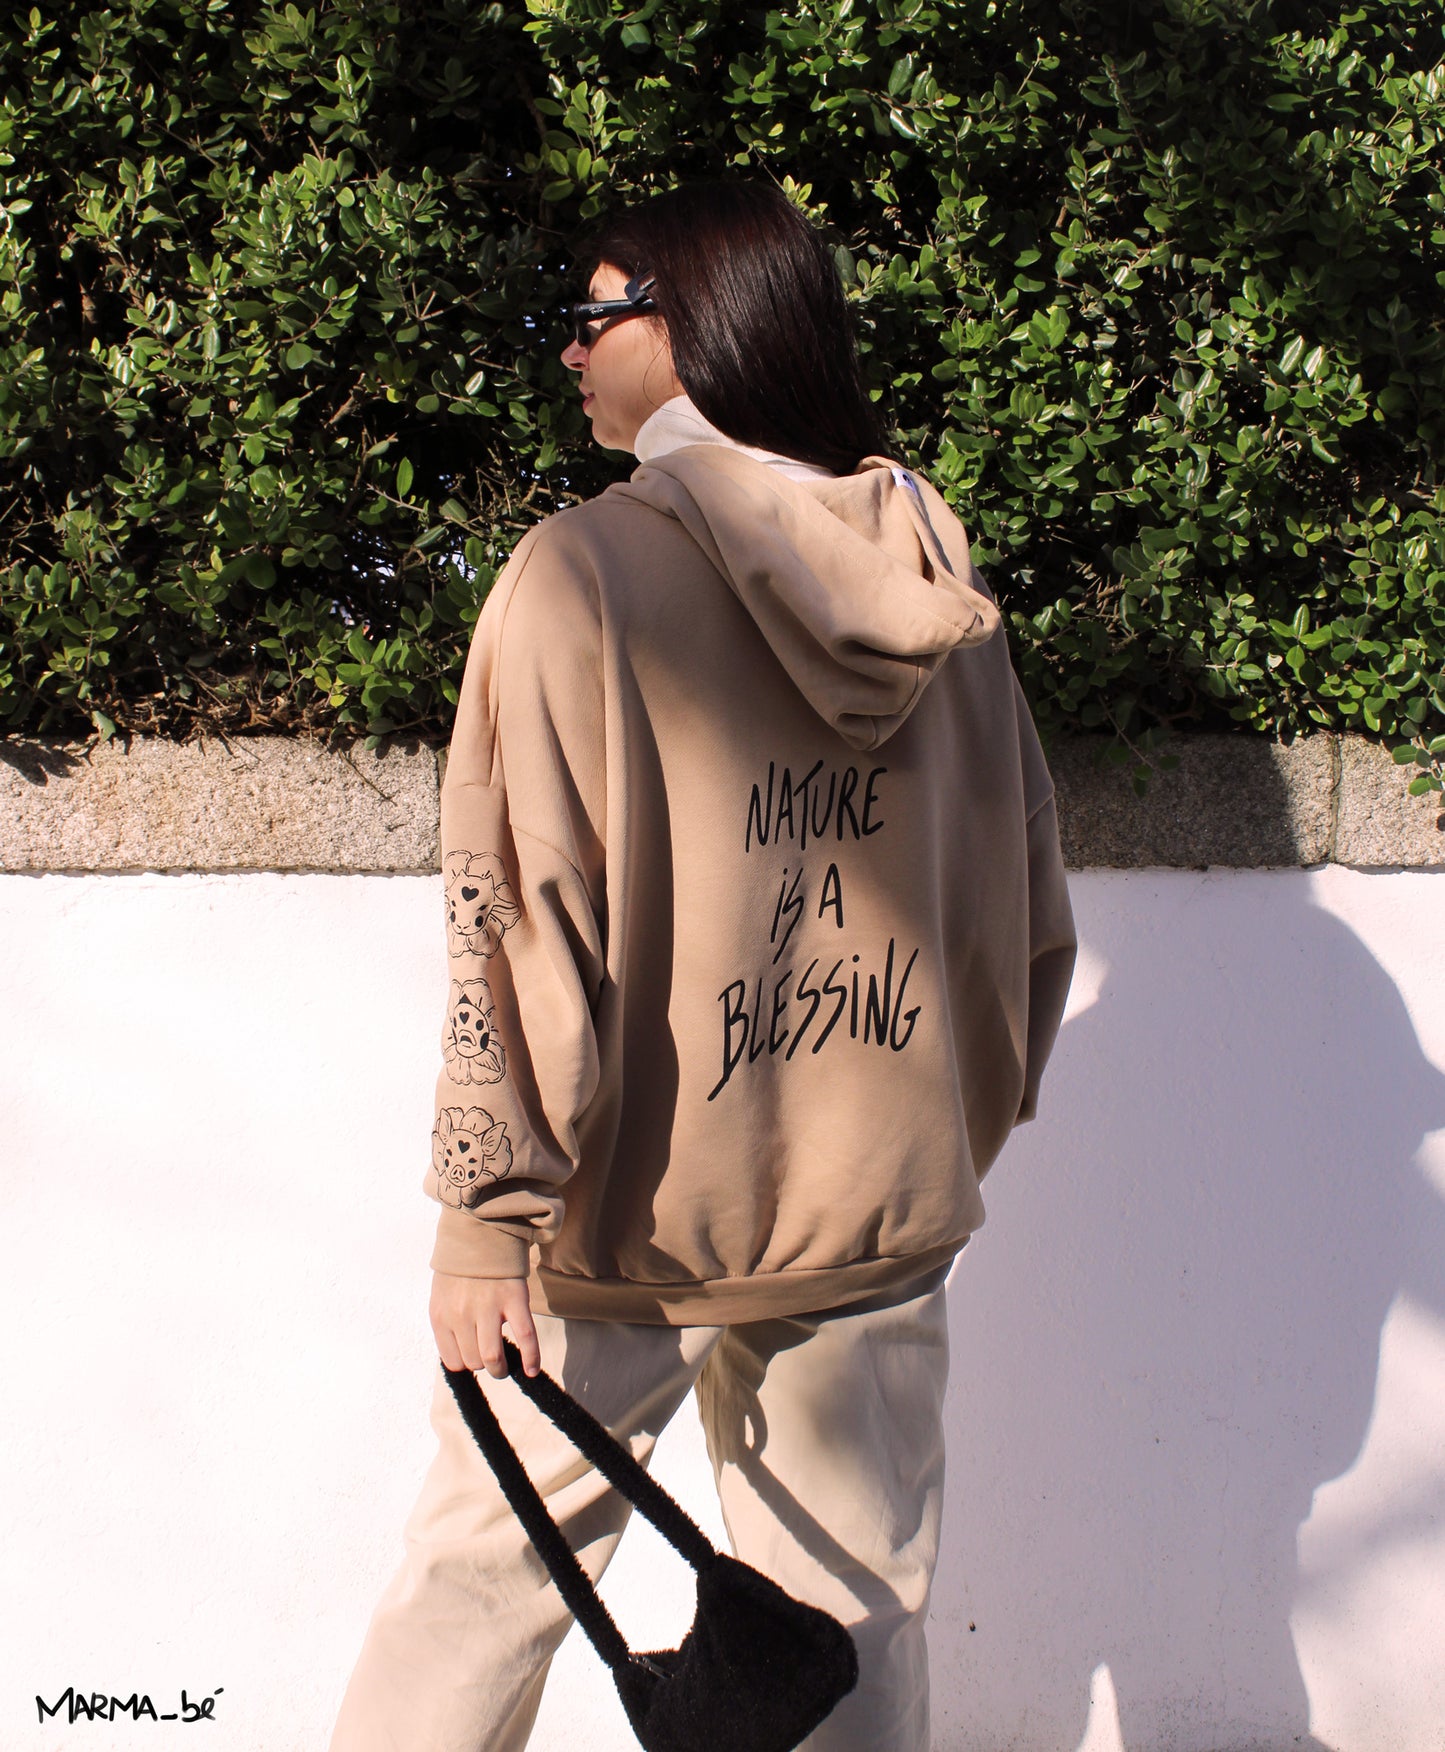 Oversize Hoodie "Nature is a Blessing"